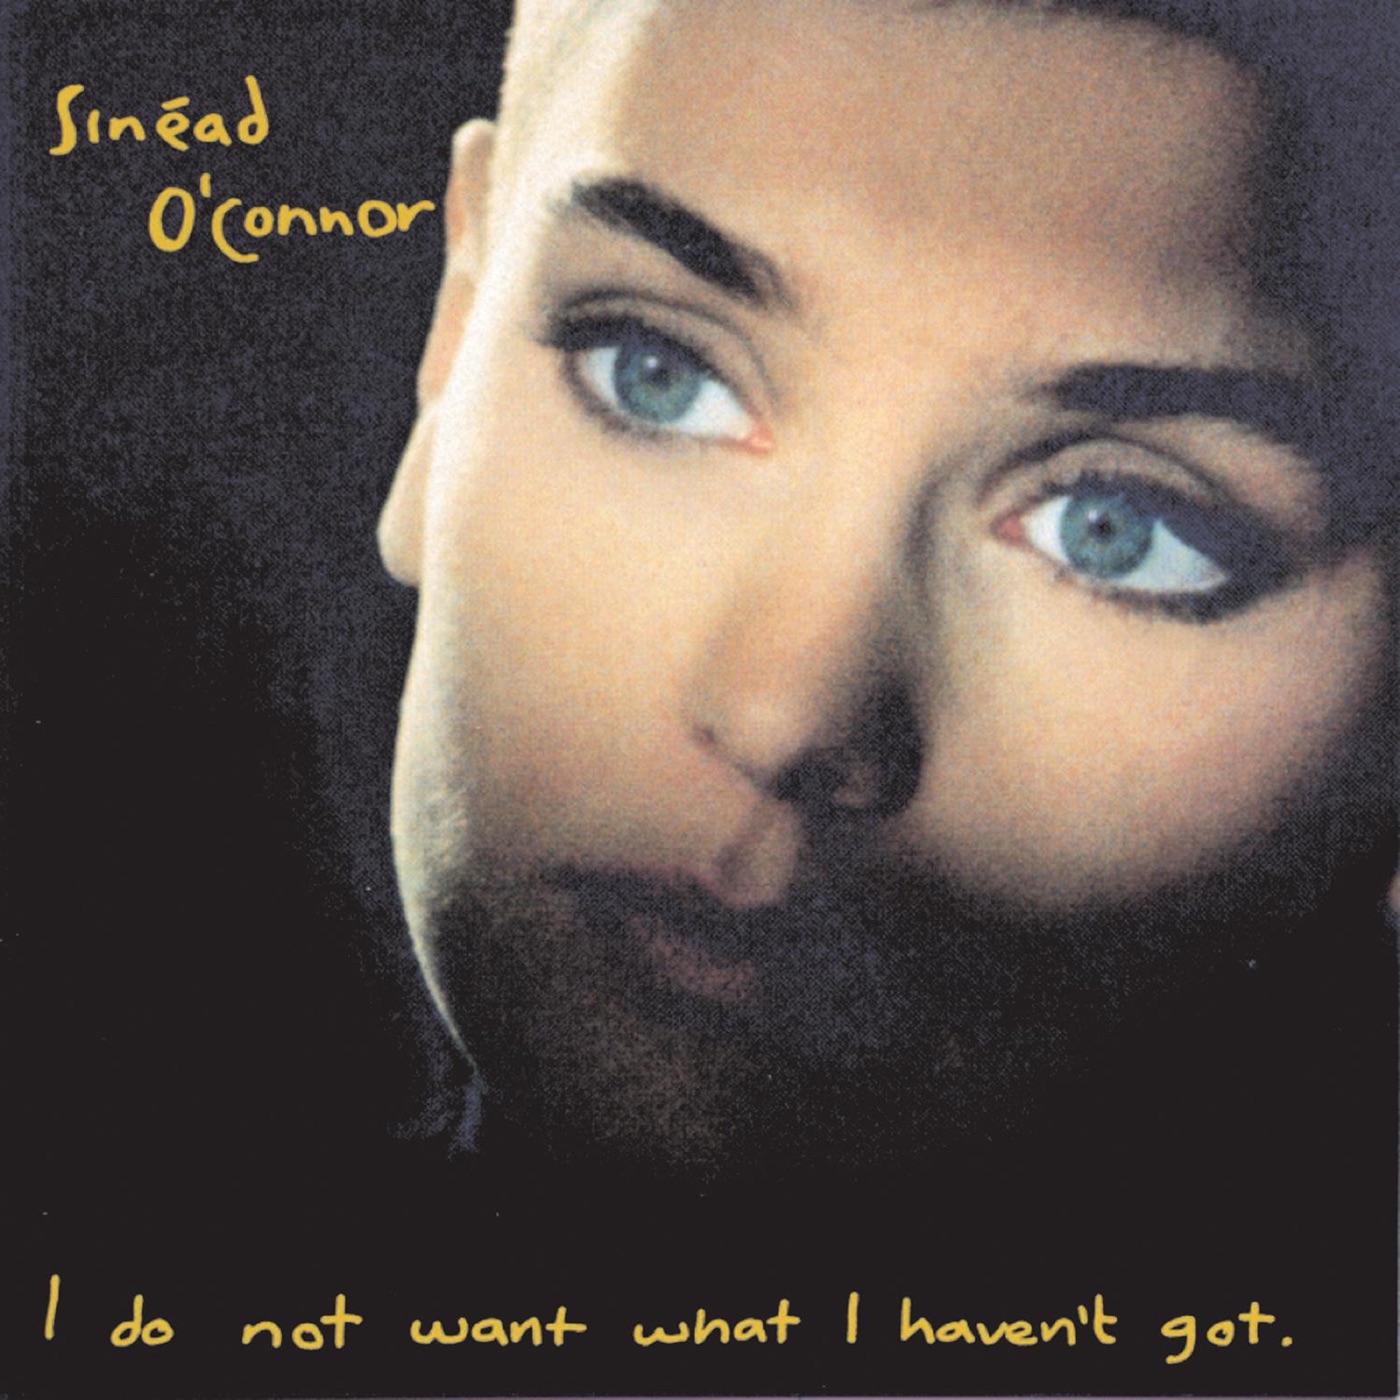 I Do Not Want What I Haven't Got by Sinéad O'Connor